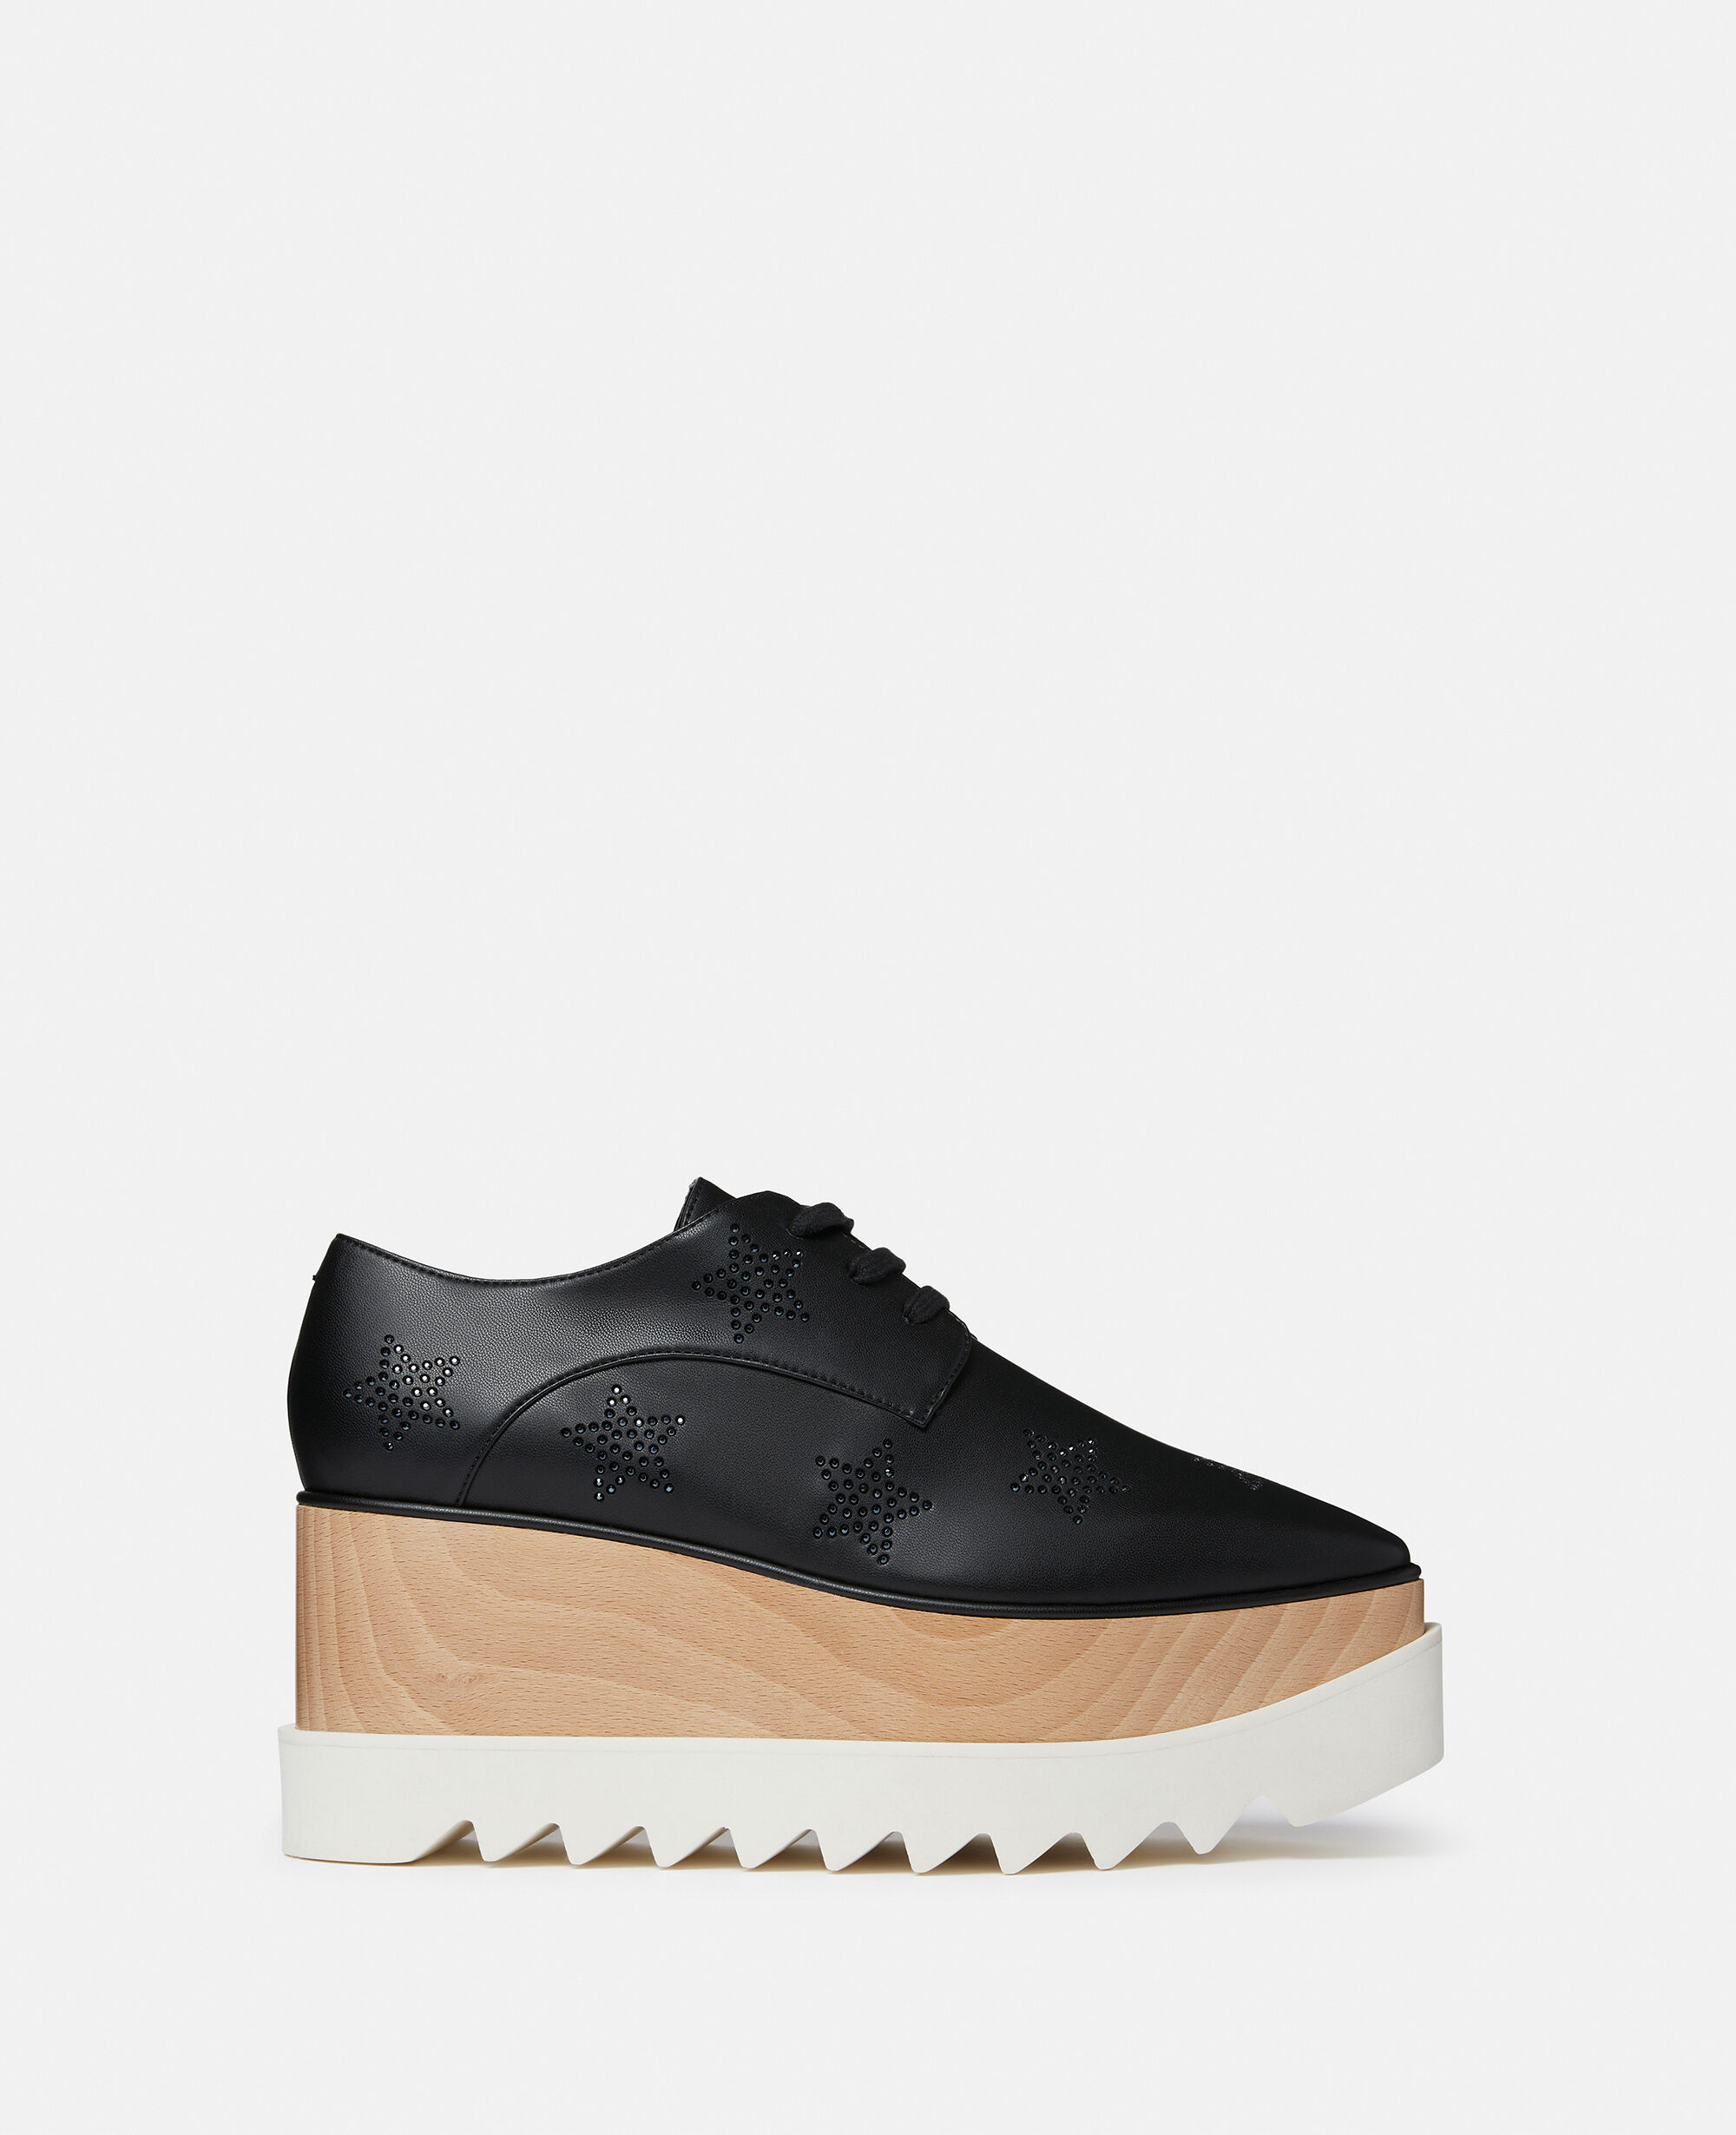 Women's Elyse Shoes Collection | Stella McCartney US